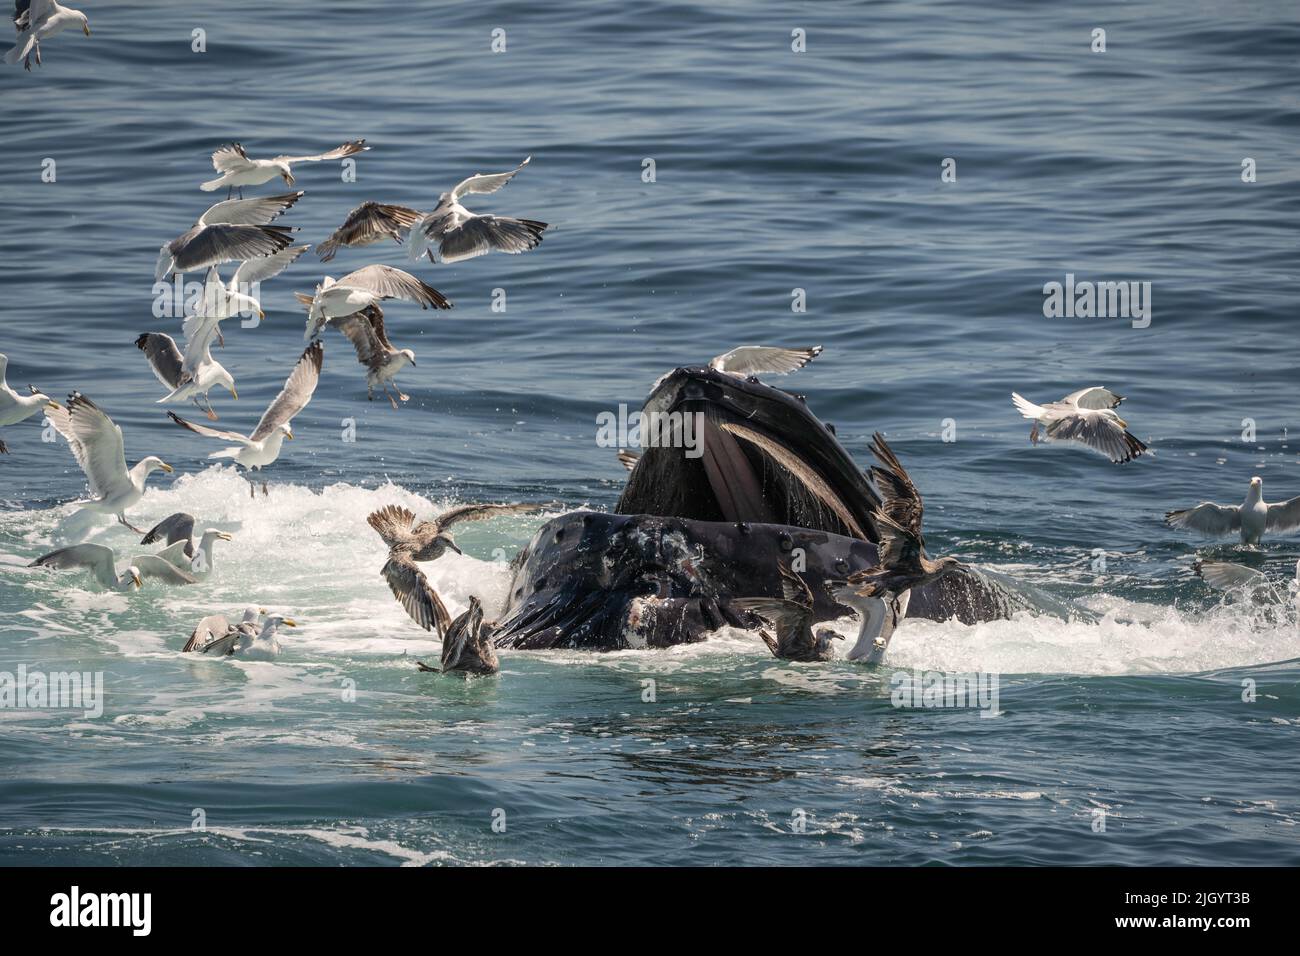 Close-up of Humpback whale bubble-net fishing off the coast of Cape Cod Stock Photo